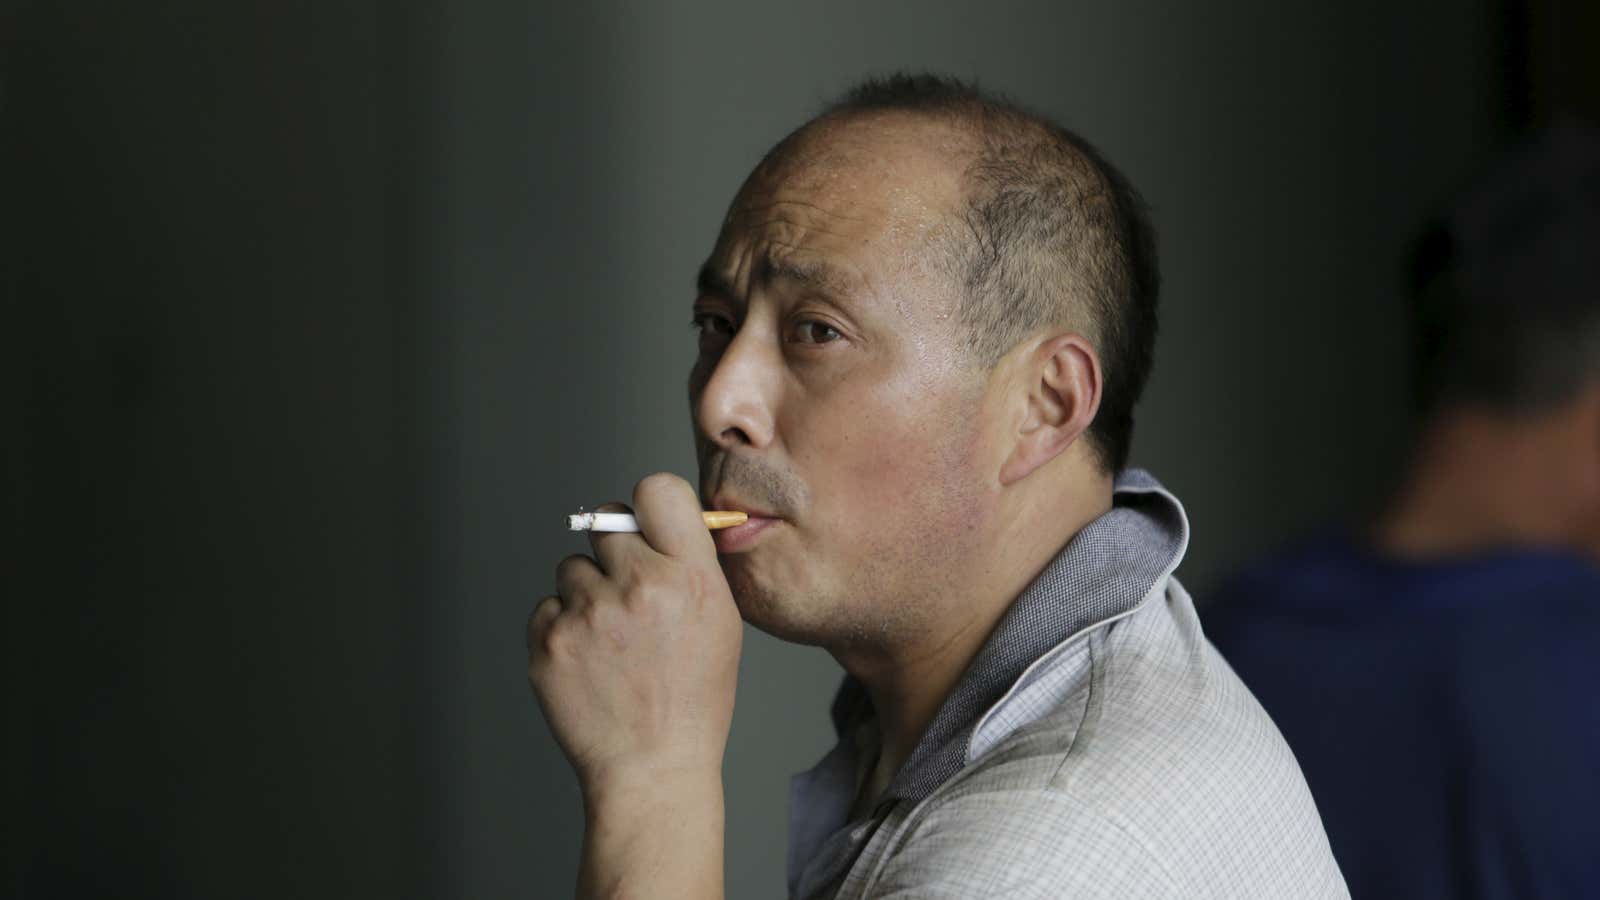 One of 300 million smokers in China.